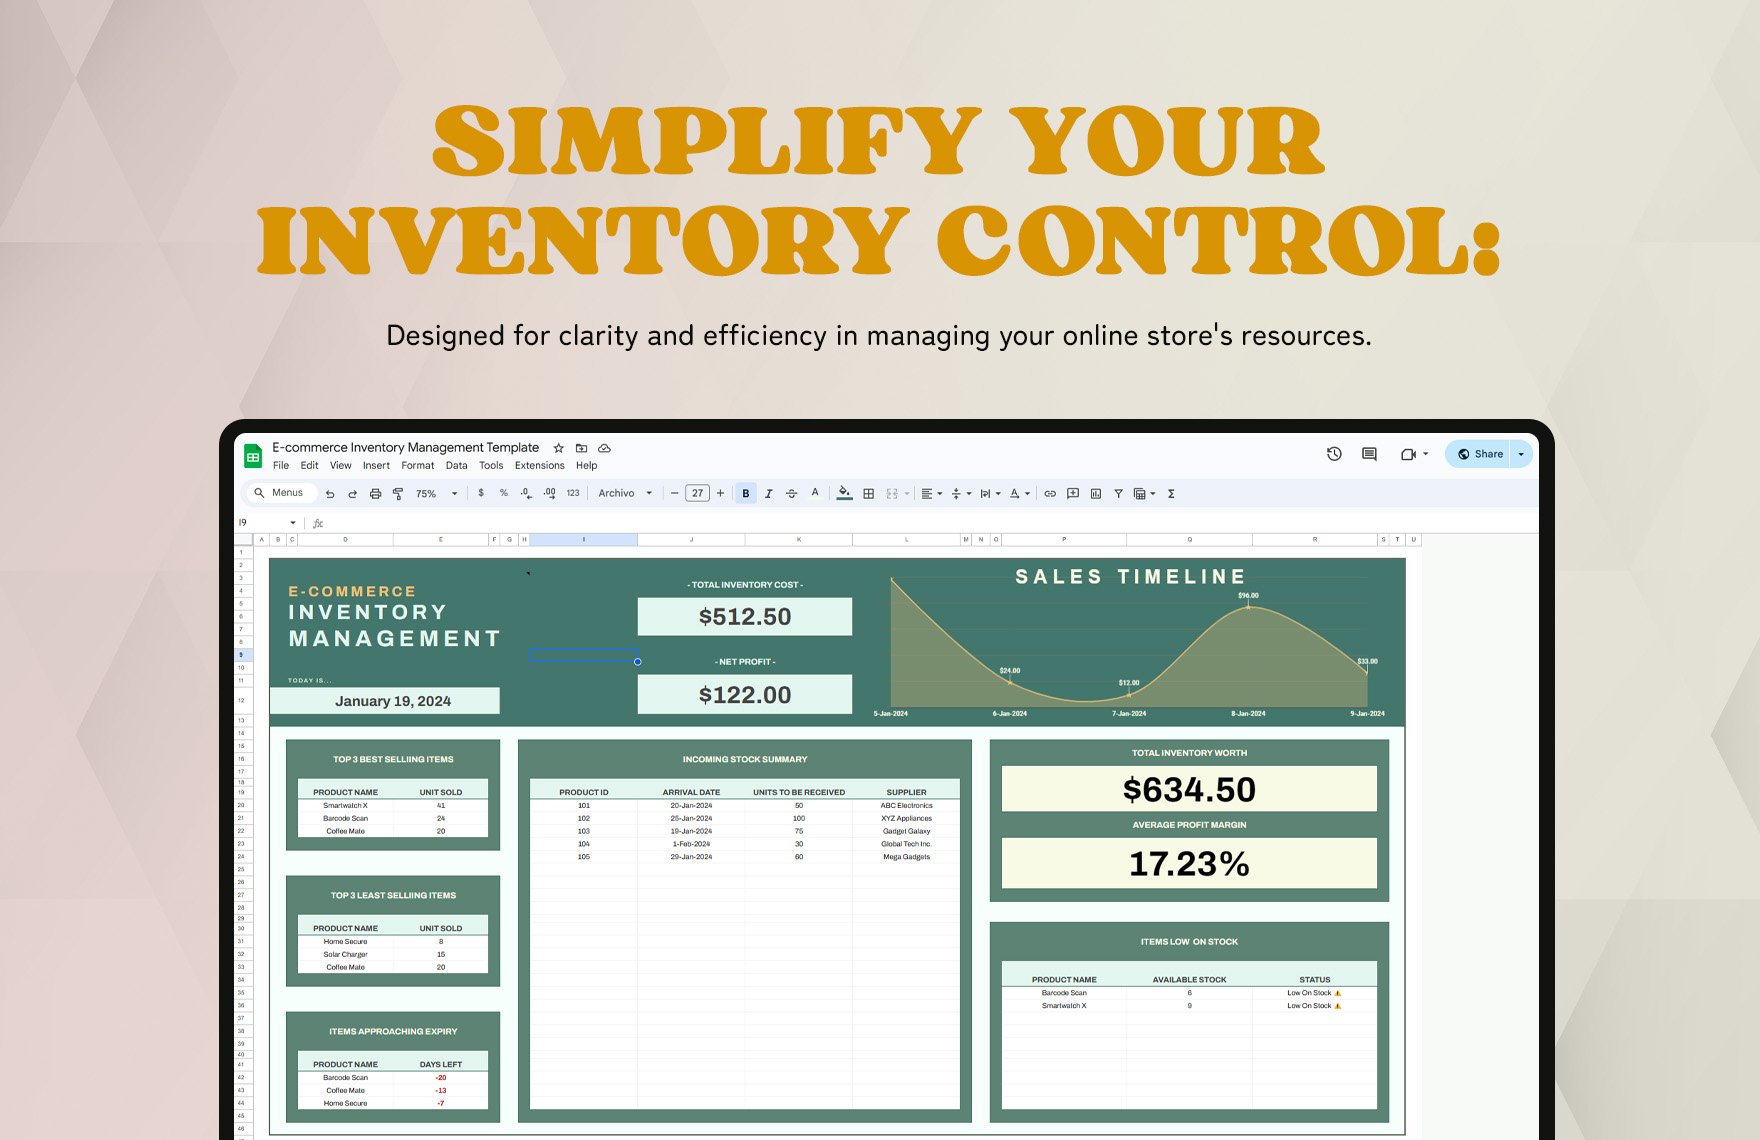 E-commerce Inventory Management Template